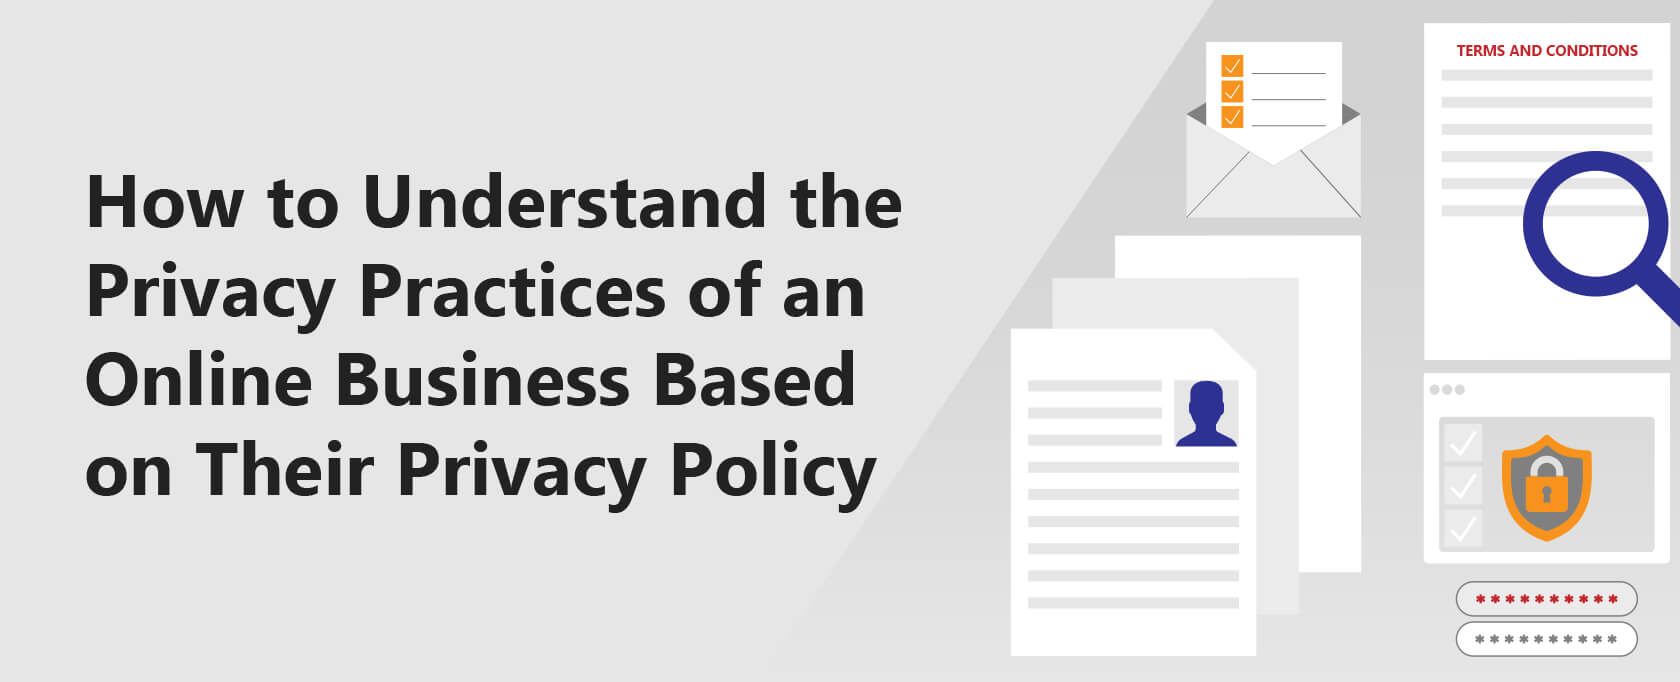 How to Understand the Privacy Practices of an Online Business Based on Their Privacy Policy